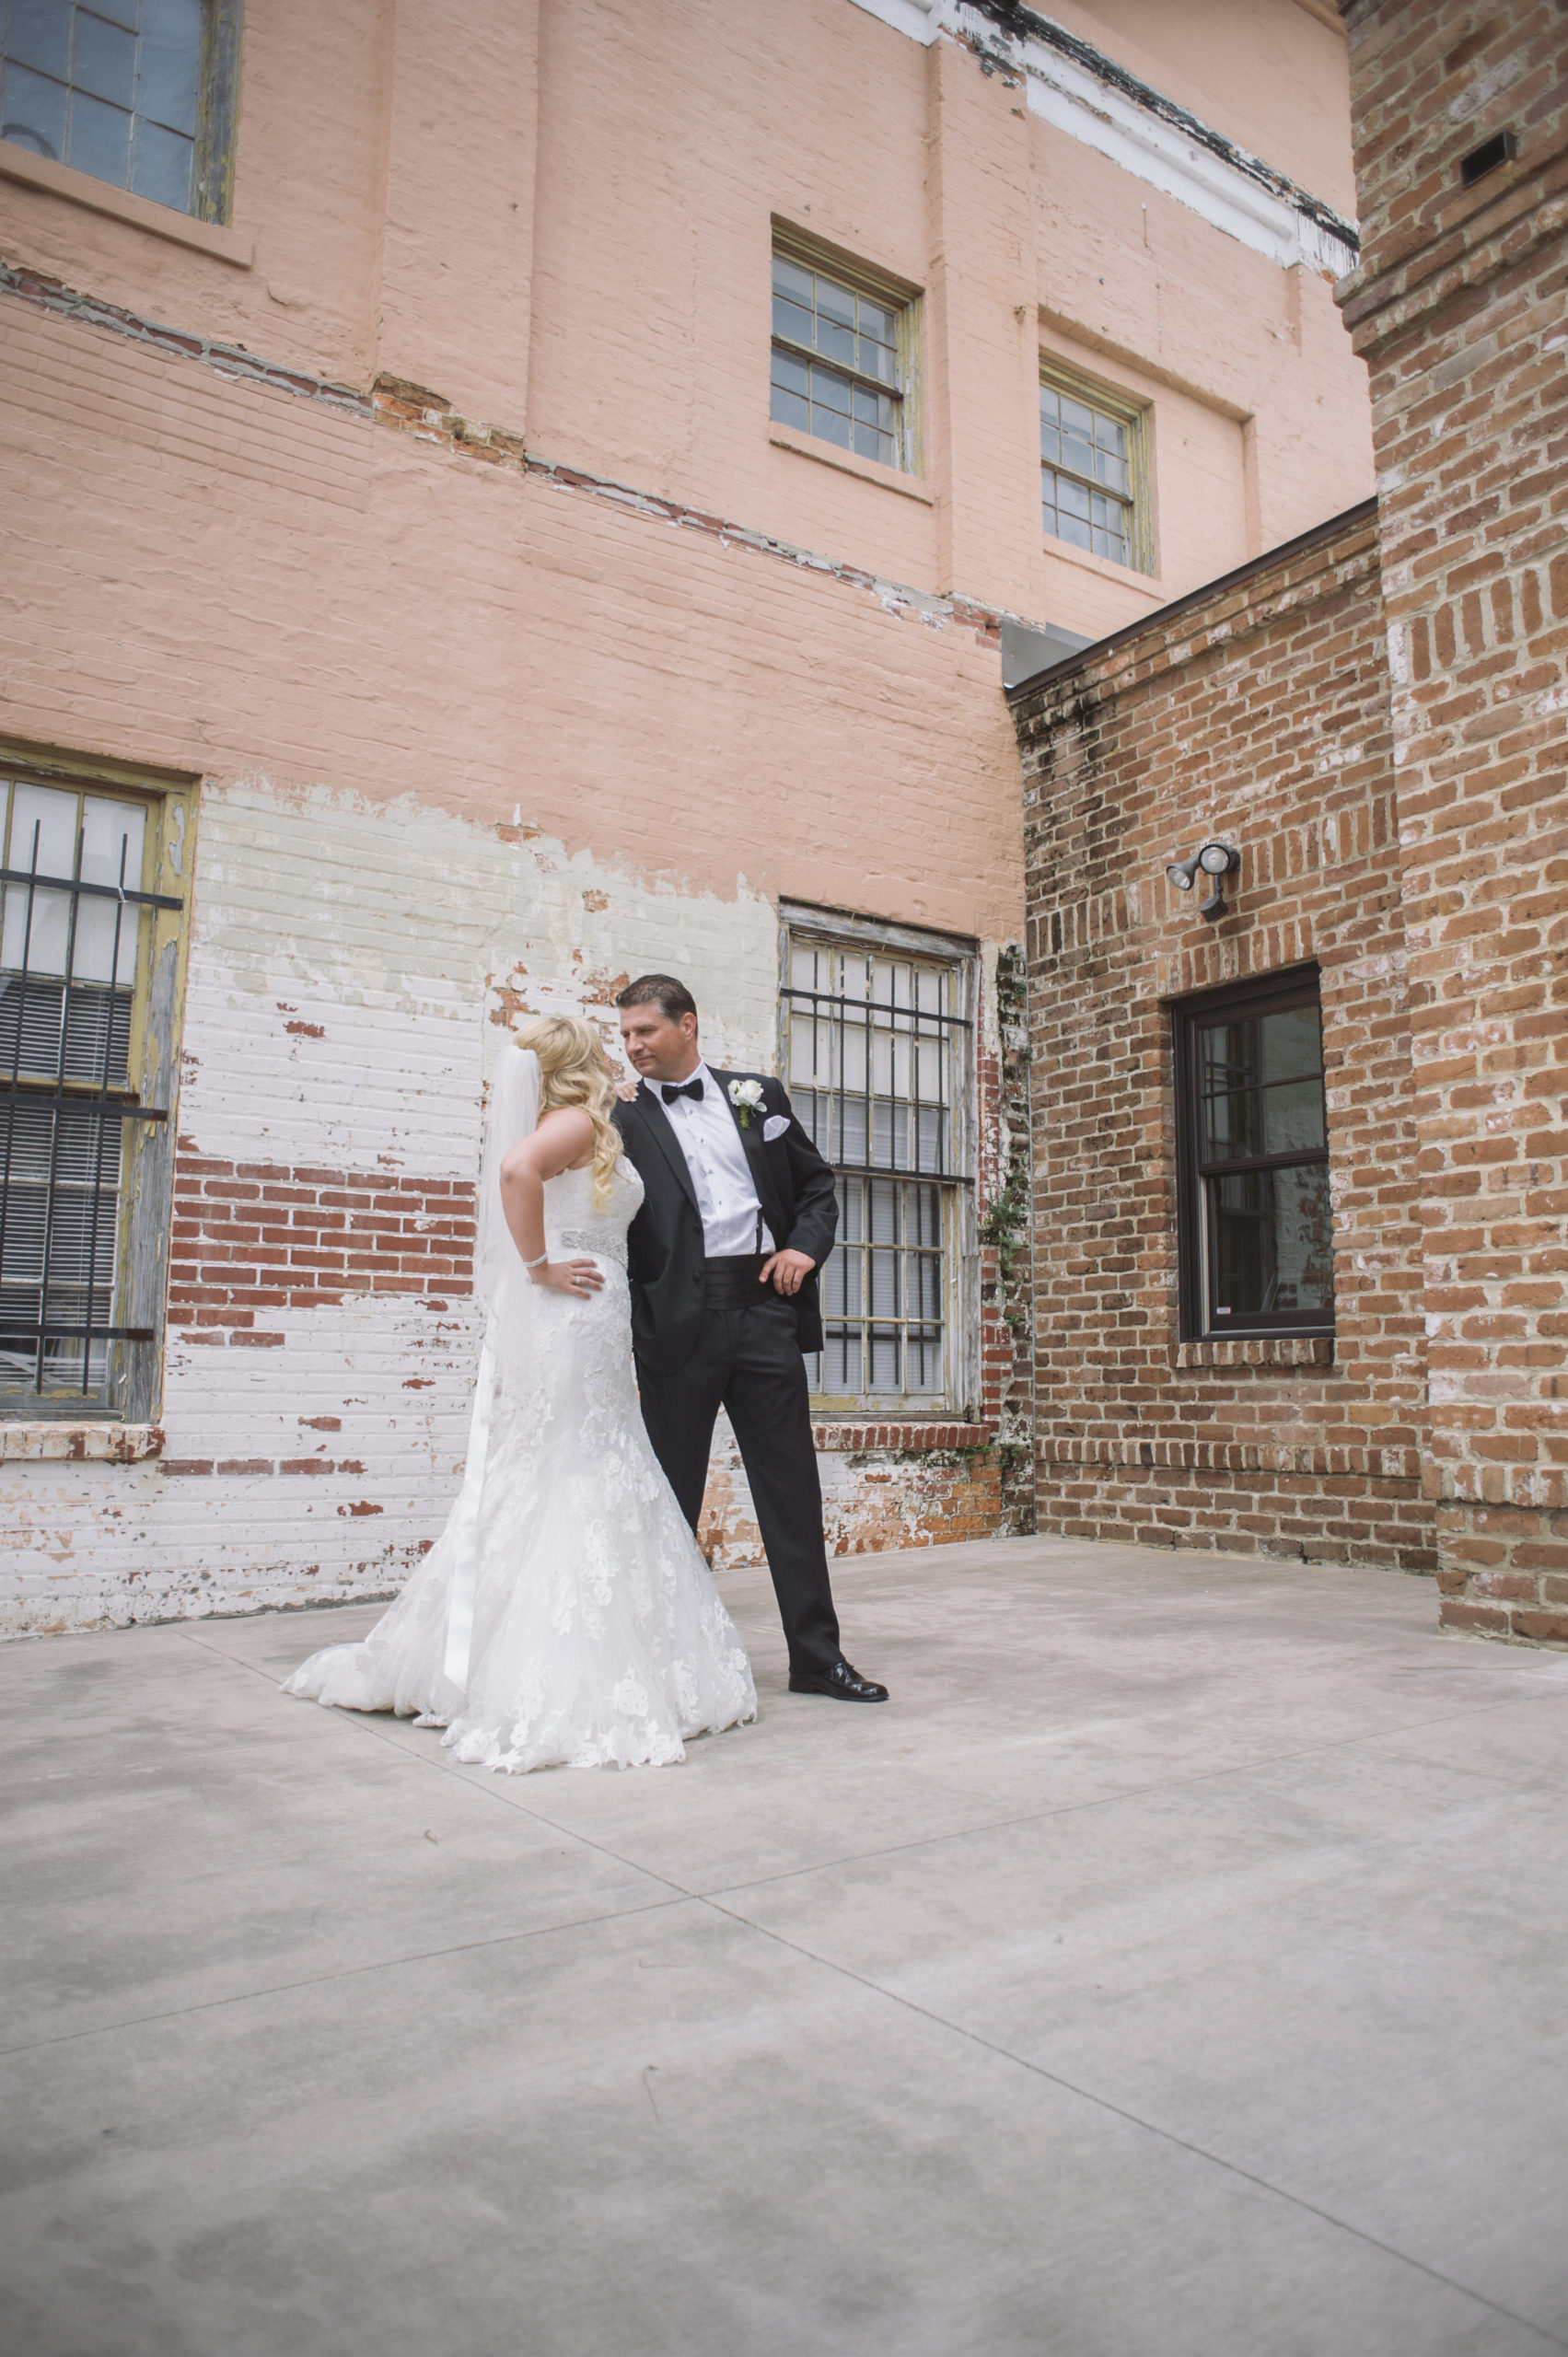 View More: http://alexissweetphotography.pass.us/lindseyandcolin